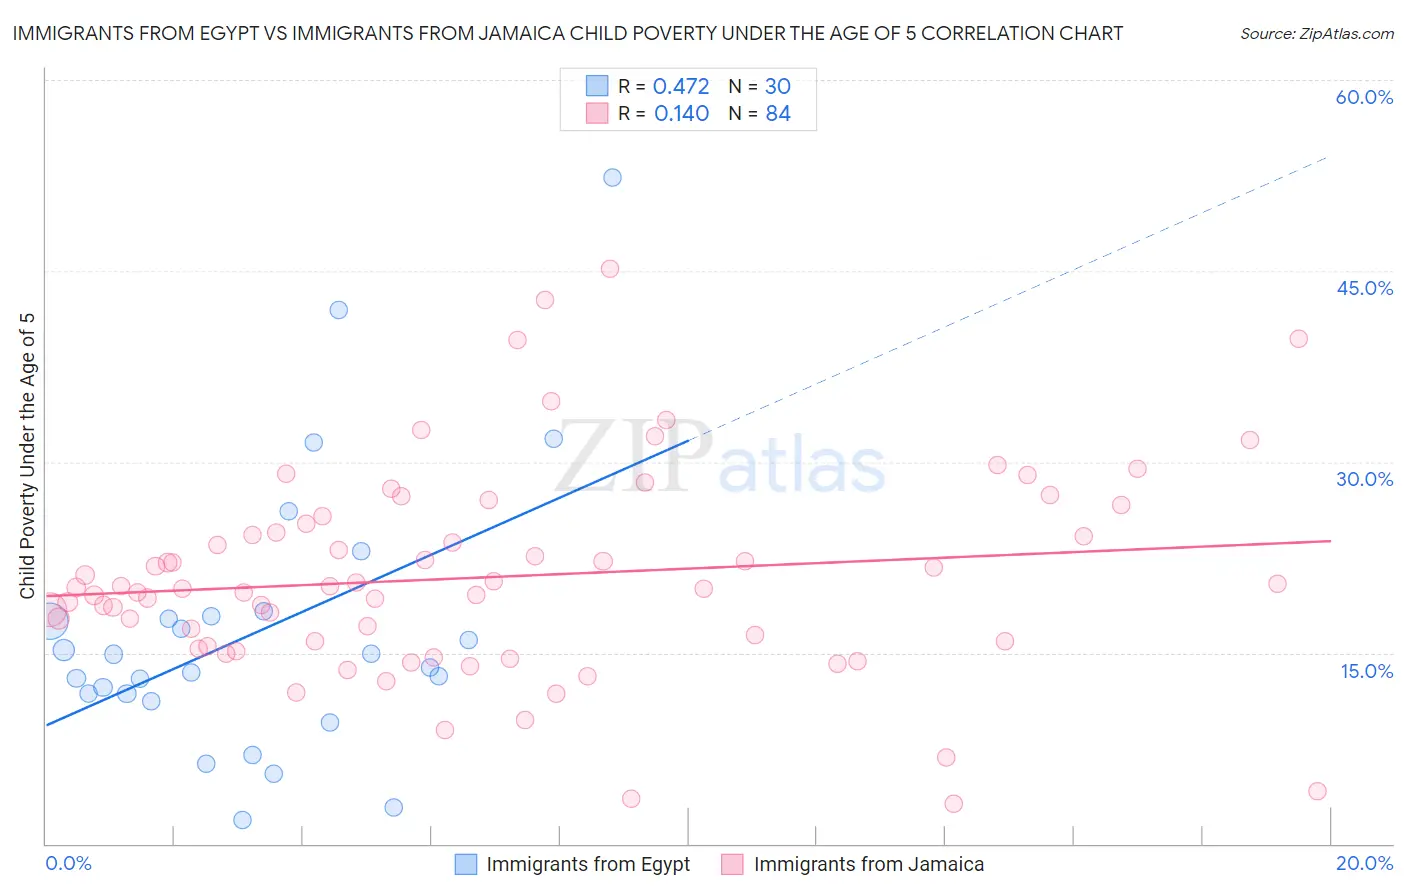 Immigrants from Egypt vs Immigrants from Jamaica Child Poverty Under the Age of 5